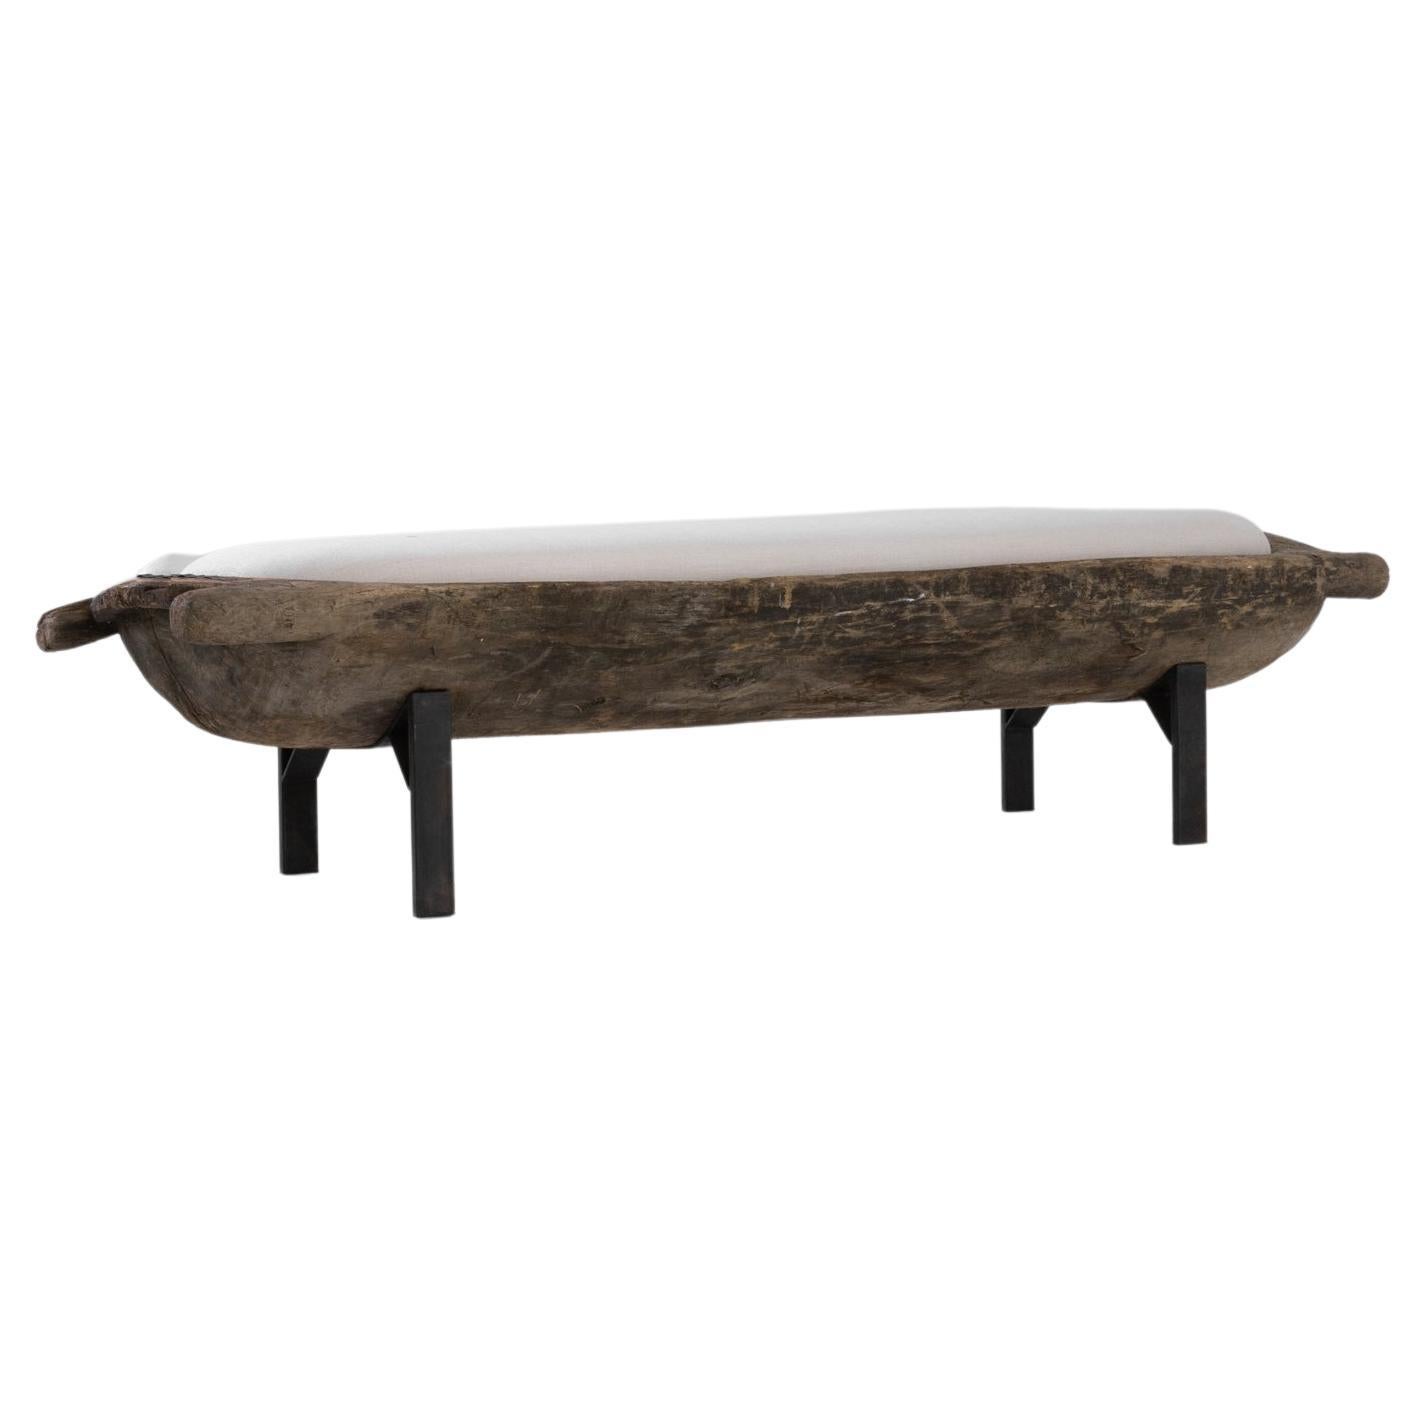 19th Century Wooden Bench with Upholstered Seat